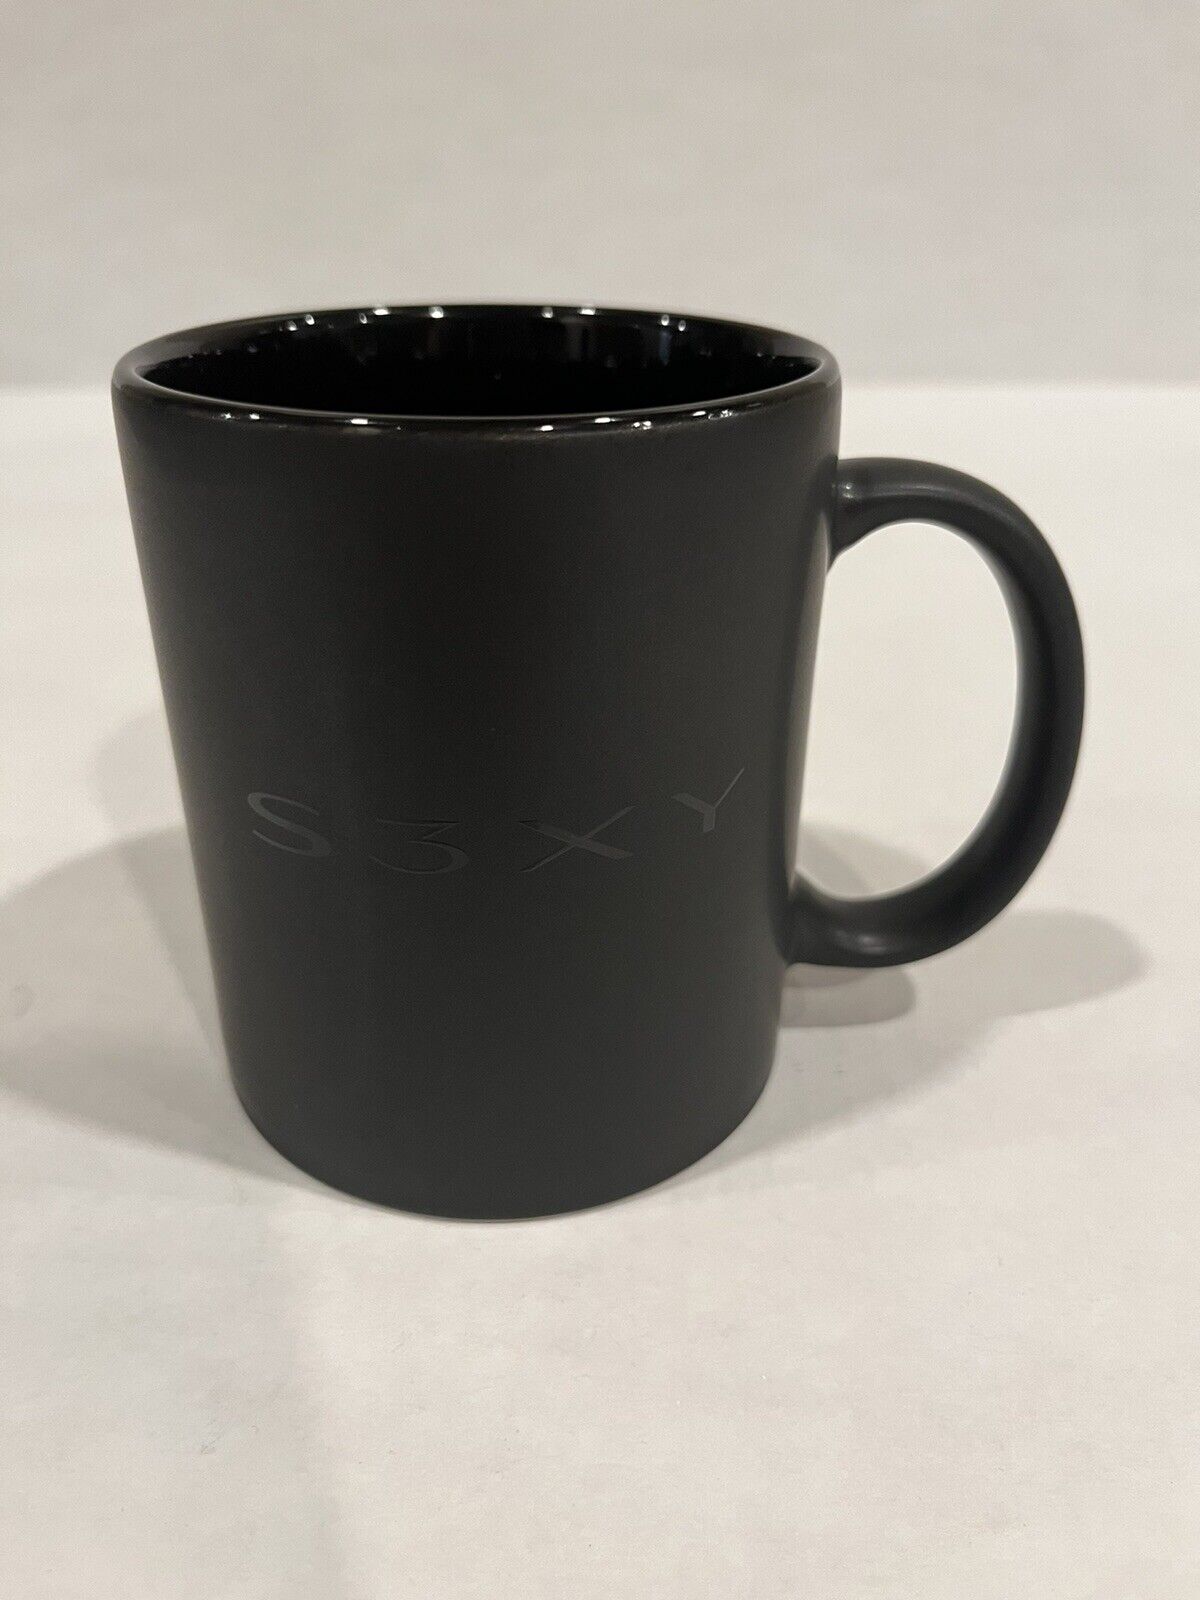 TESLA Authentic S3XY Mug Limited Edition Collectible Coffee Black Sexy Sold Out